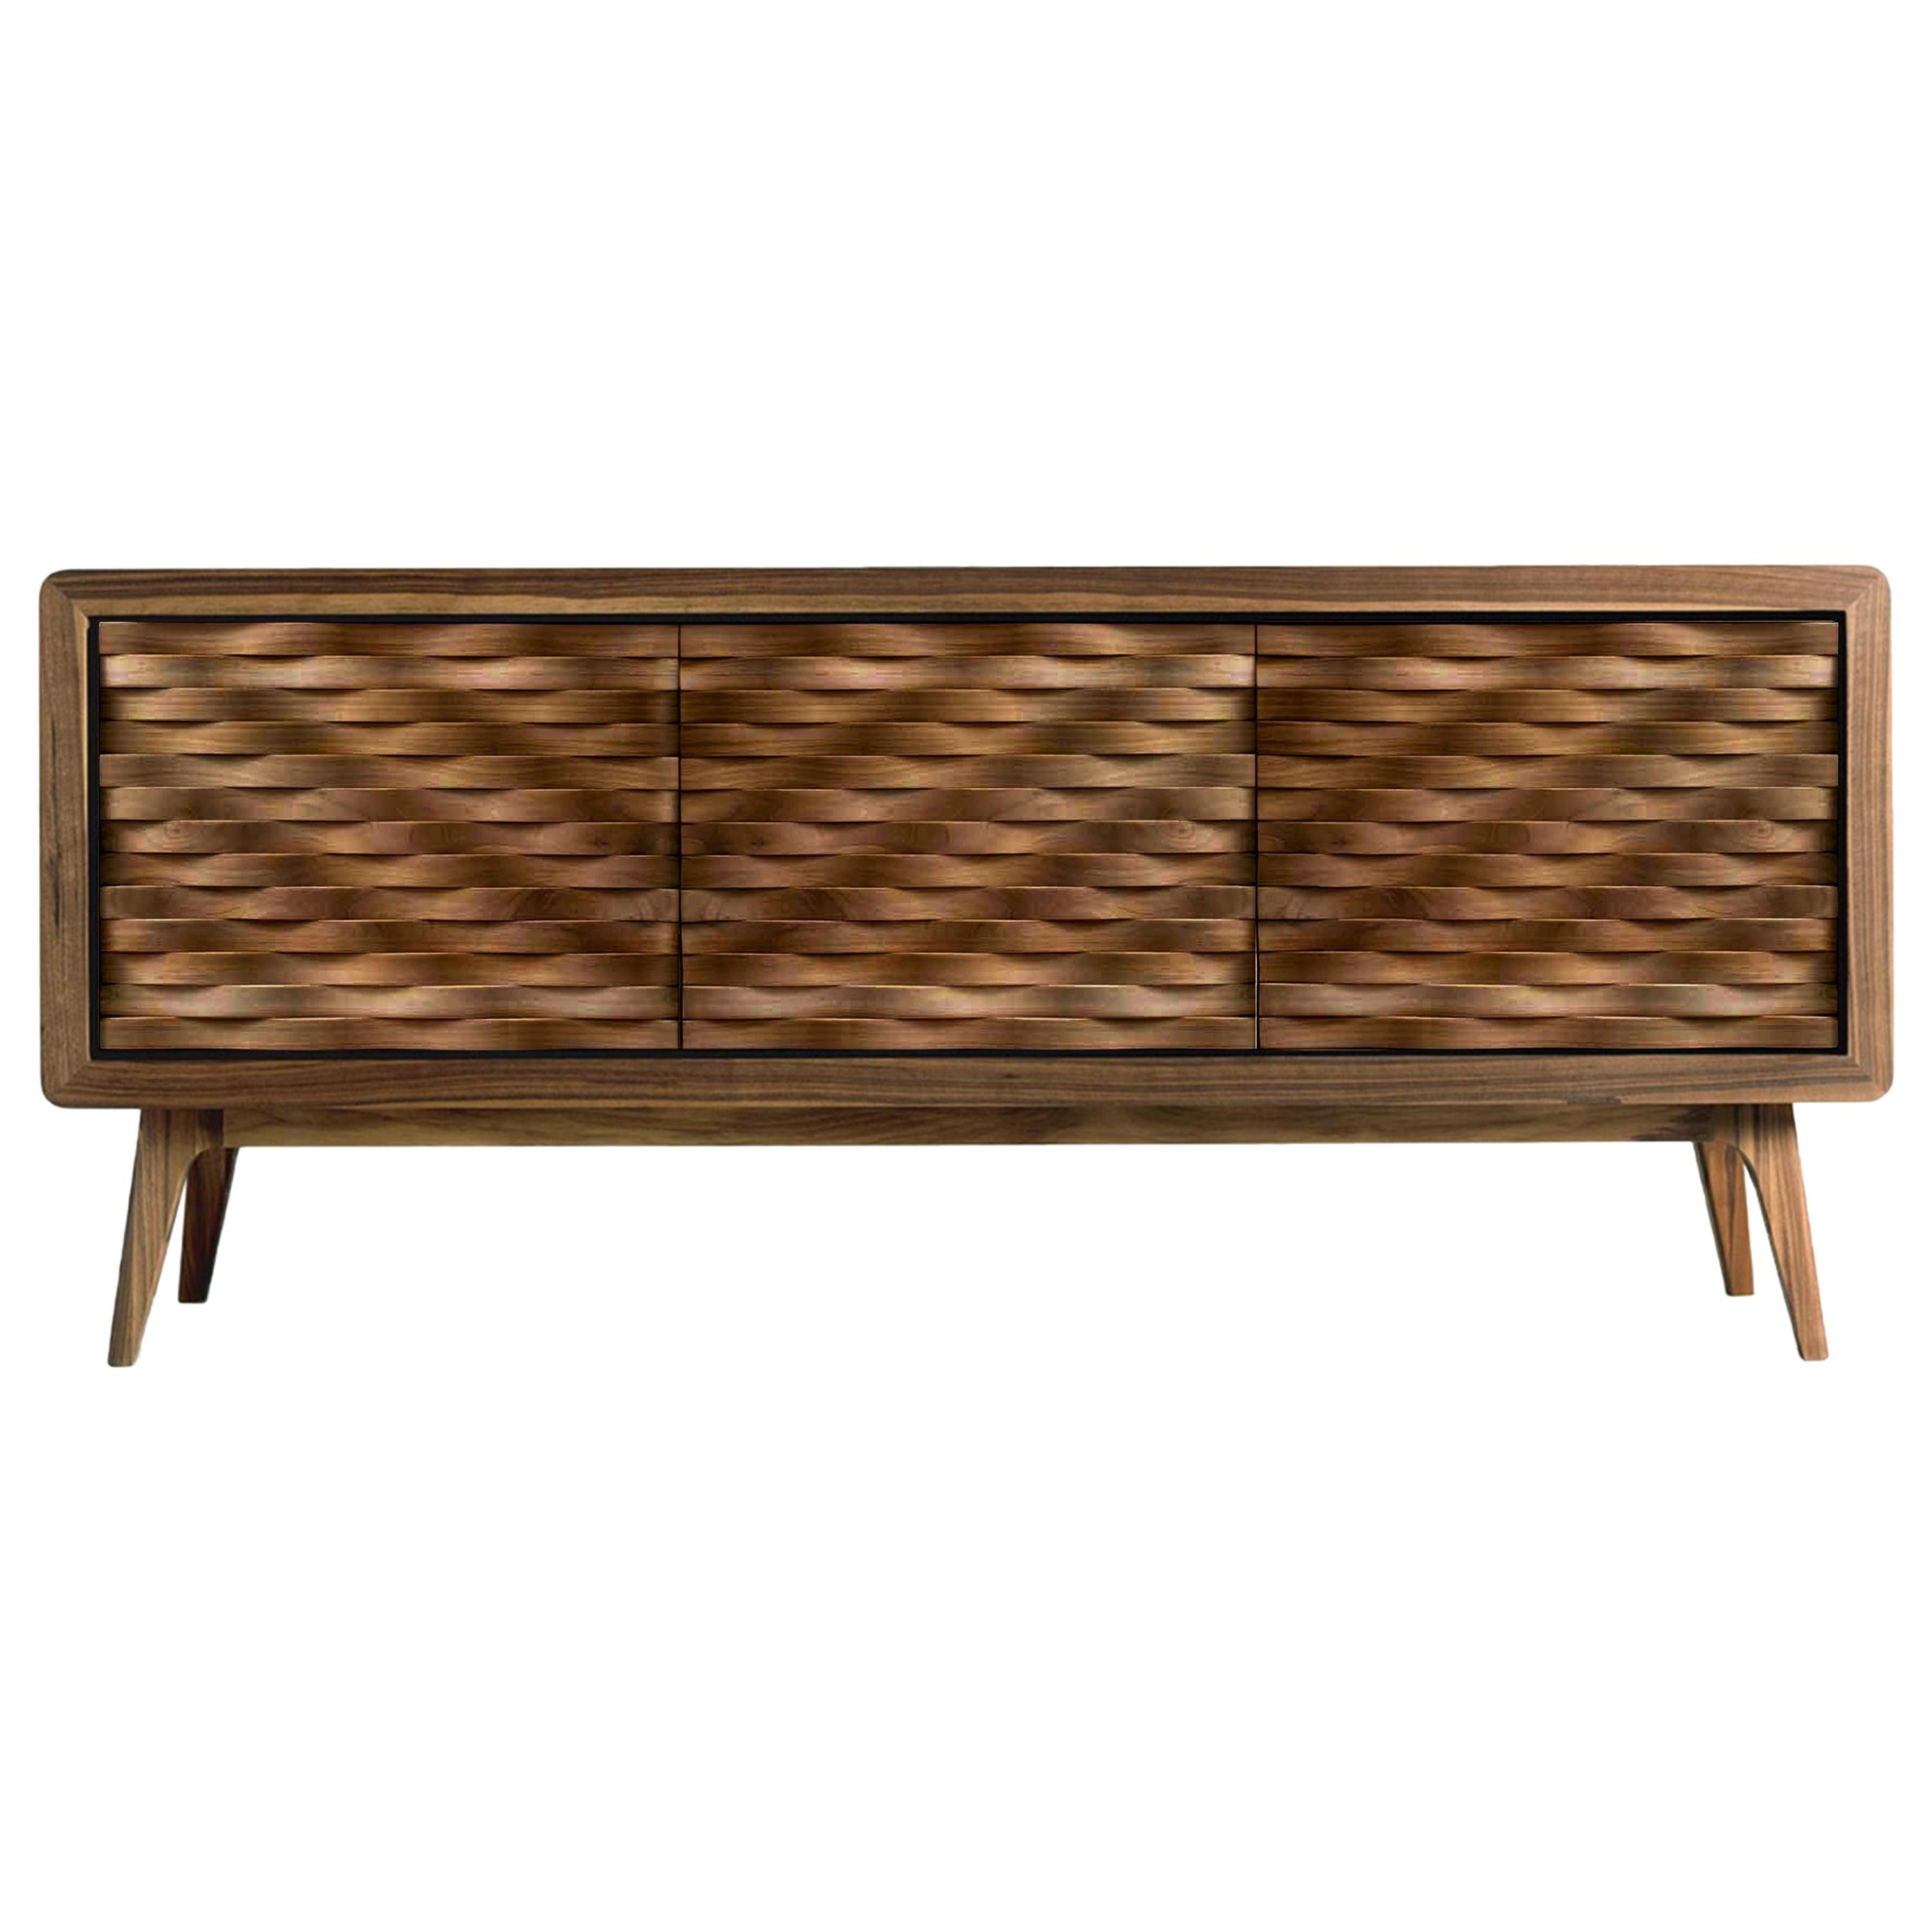 Artes Nastro Solid Wood Sideboard, Walnut Natural Finish, Contemporary For Sale